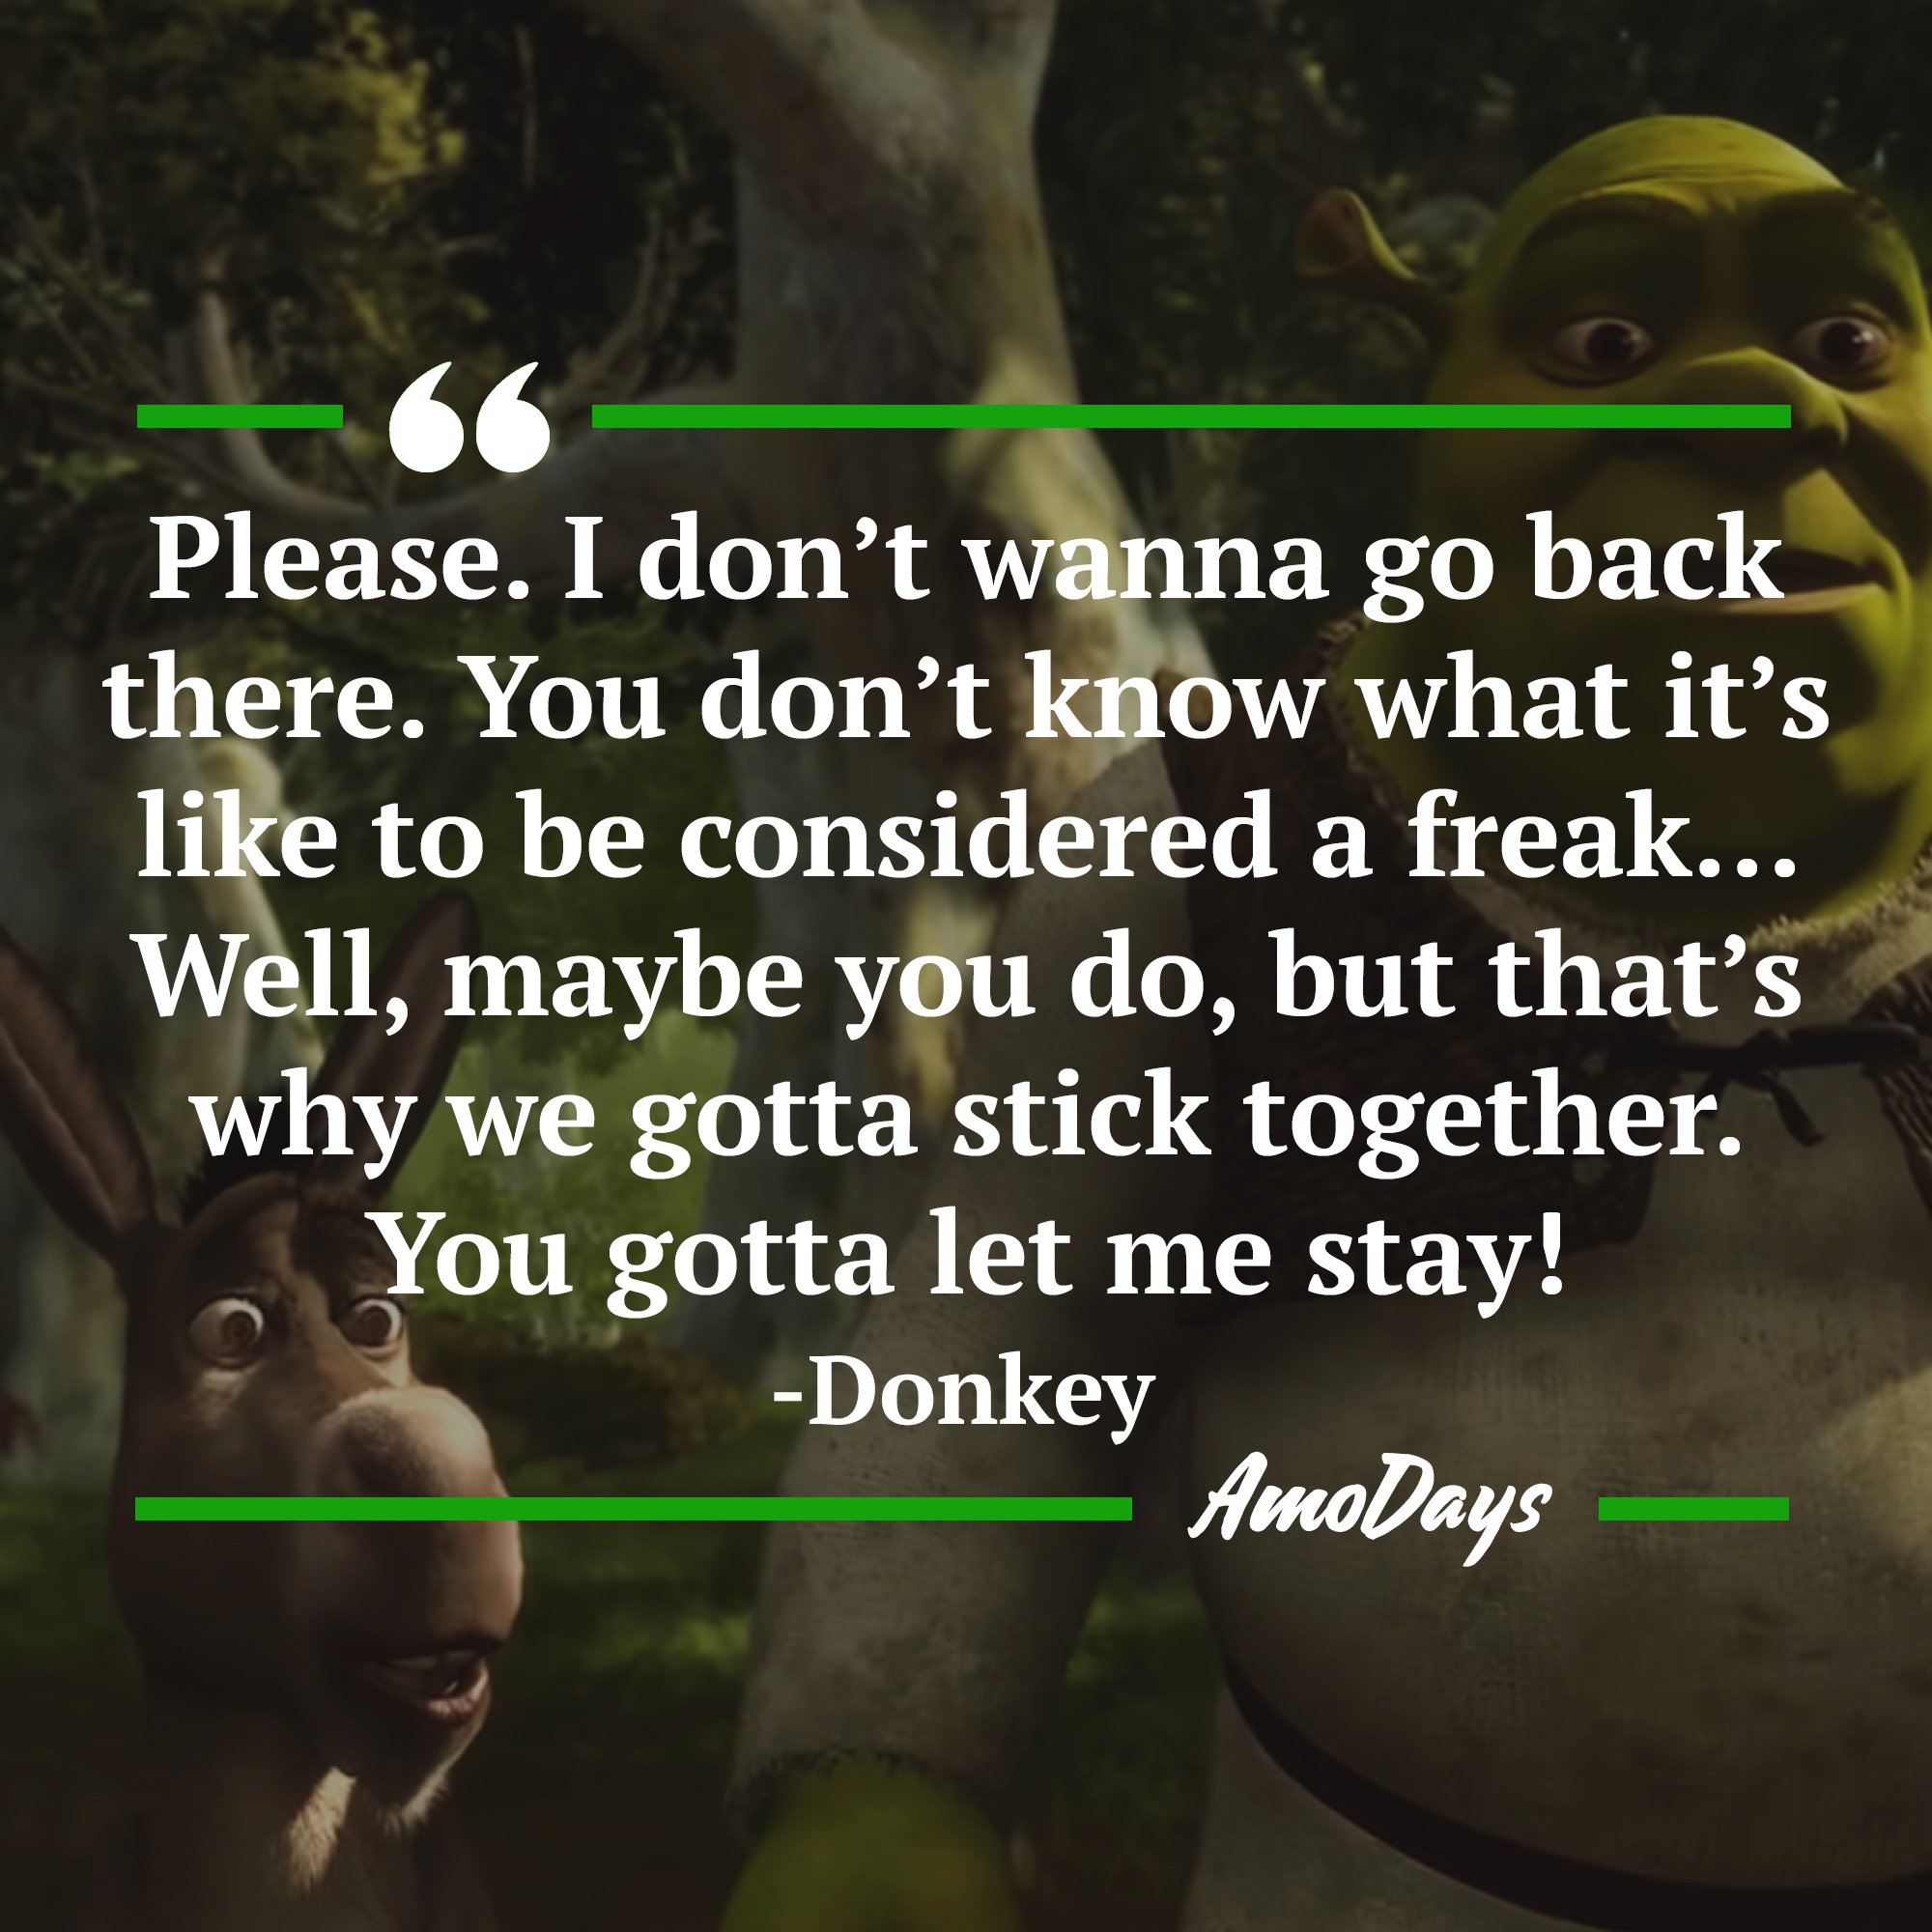 Donkey's quote: “Please. I don’t wanna go back there. You don’t know what it’s like to be considered a freak… Well, maybe you do, but that’s why we gotta stick together. You gotta let me stay!” Image: AmoDays 